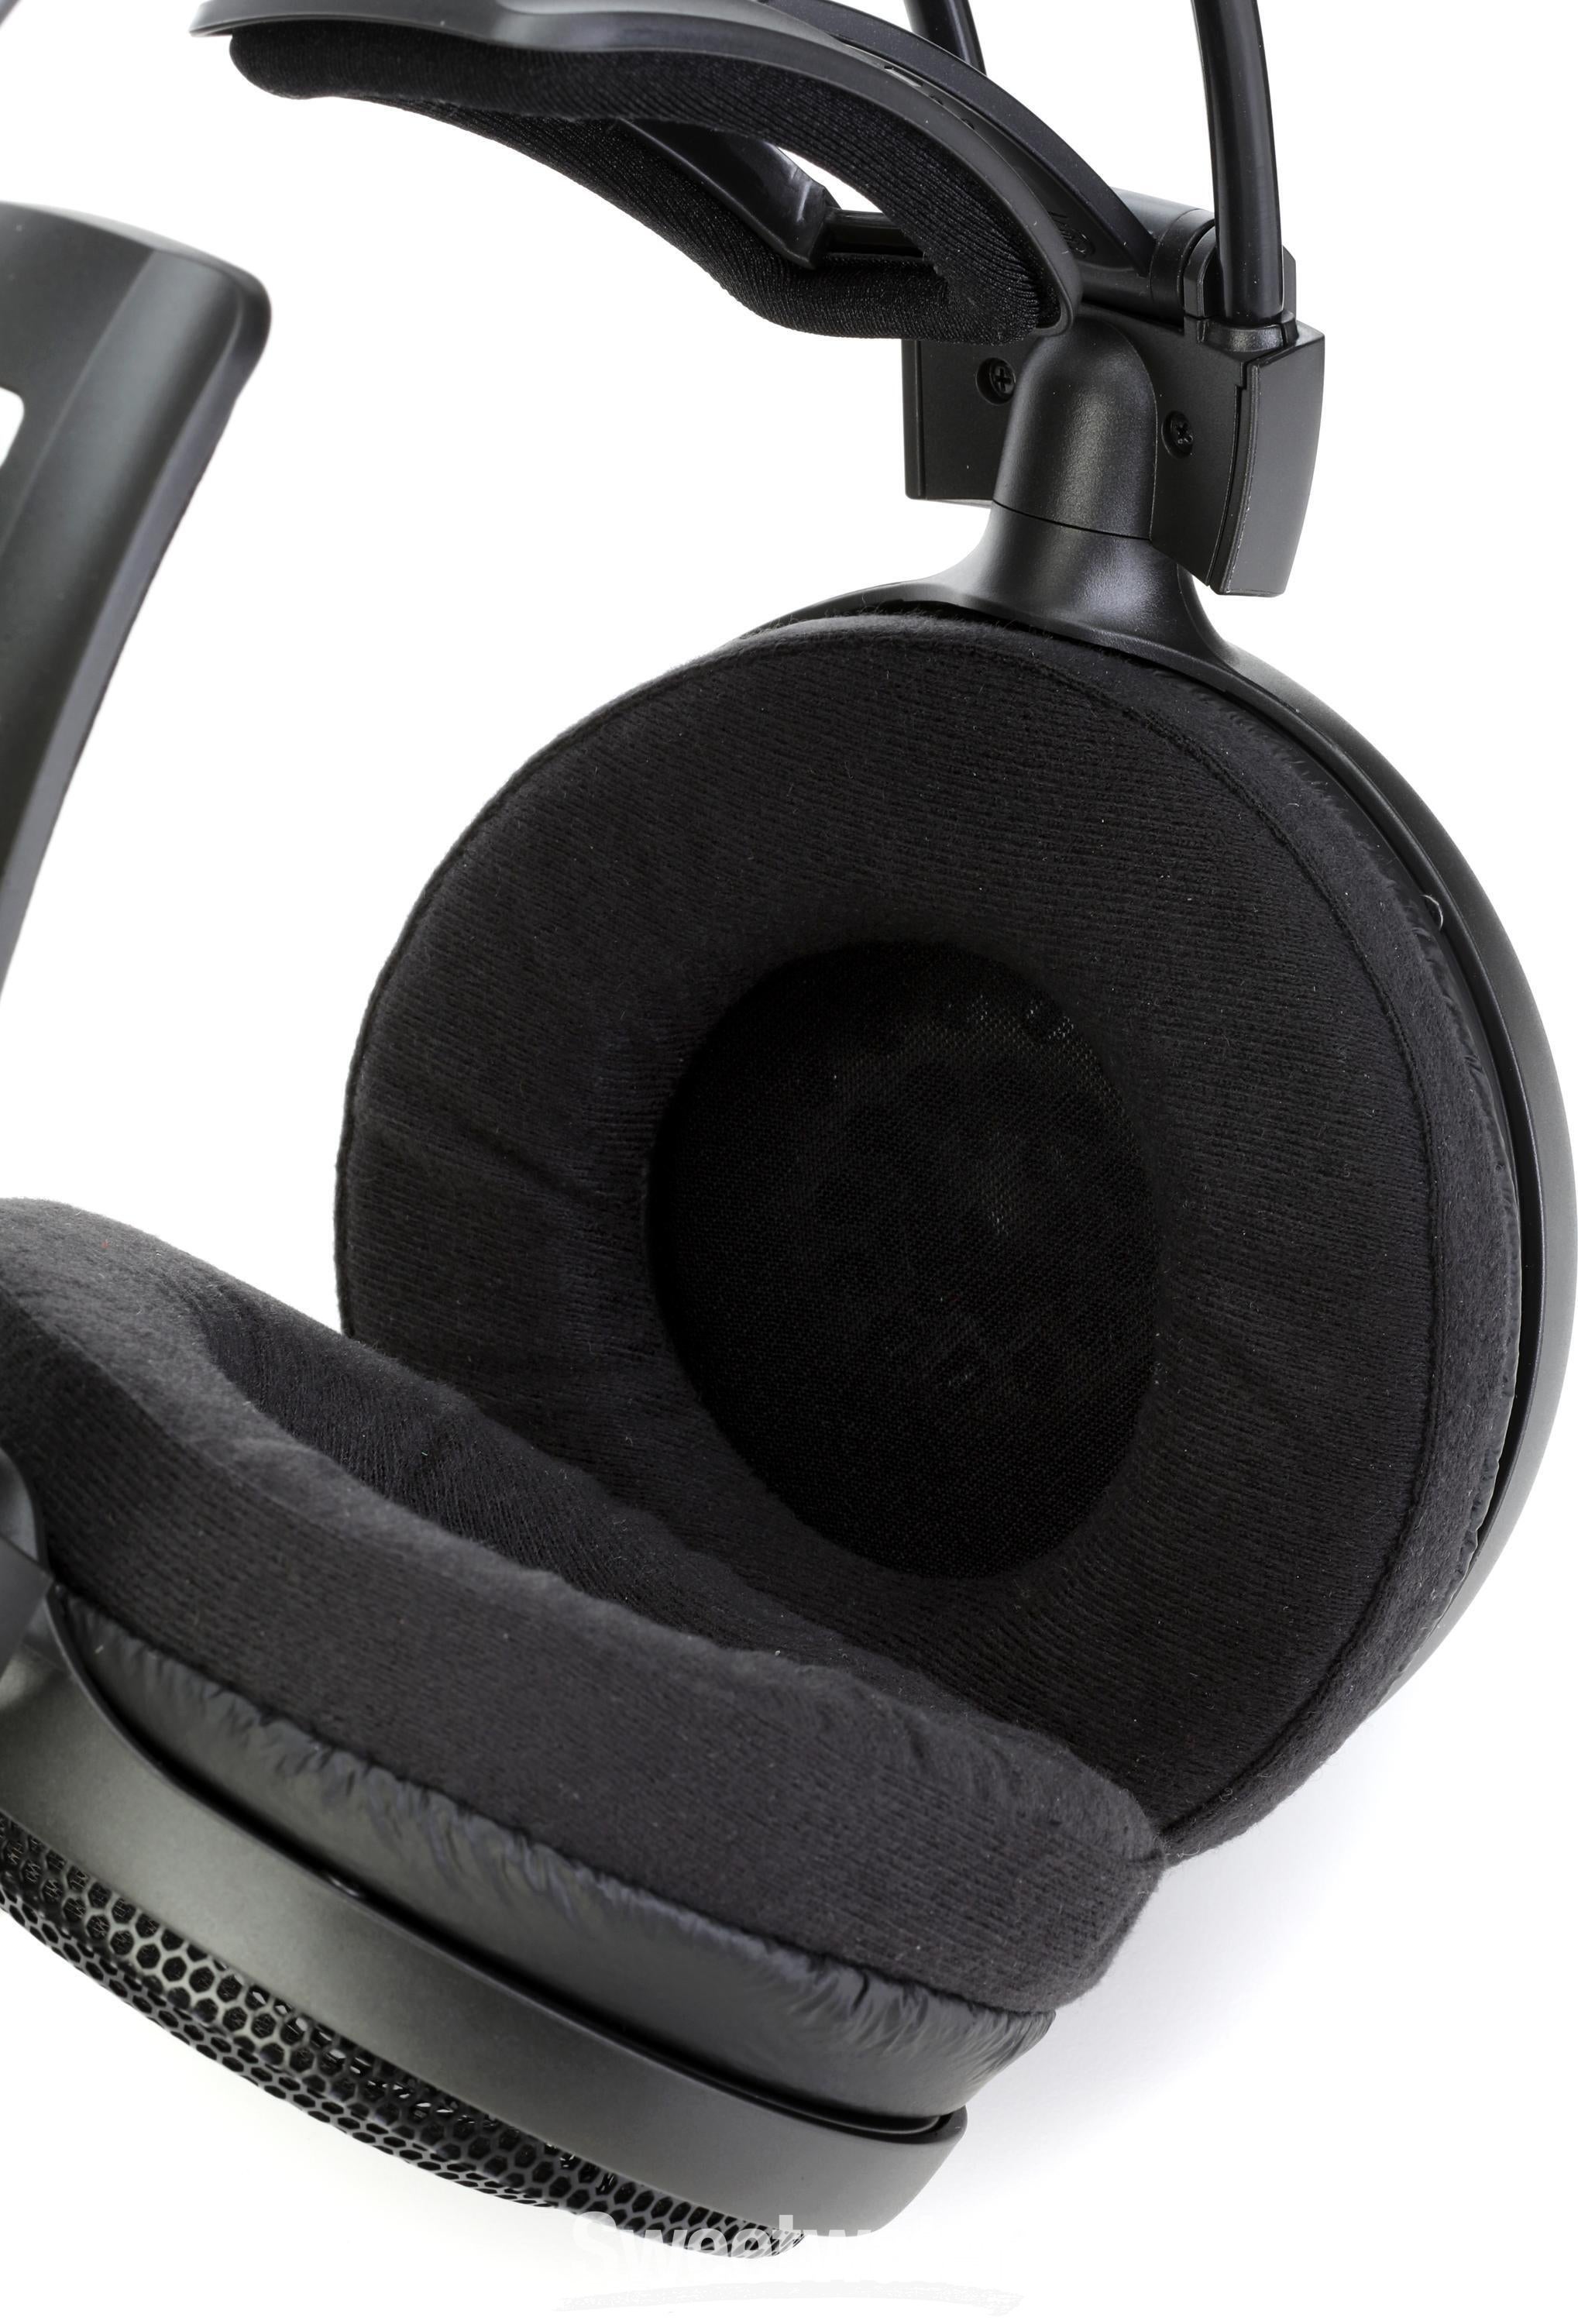 Audio-Technica ATH-AD500X Open-back Dynamic Headphones | Sweetwater